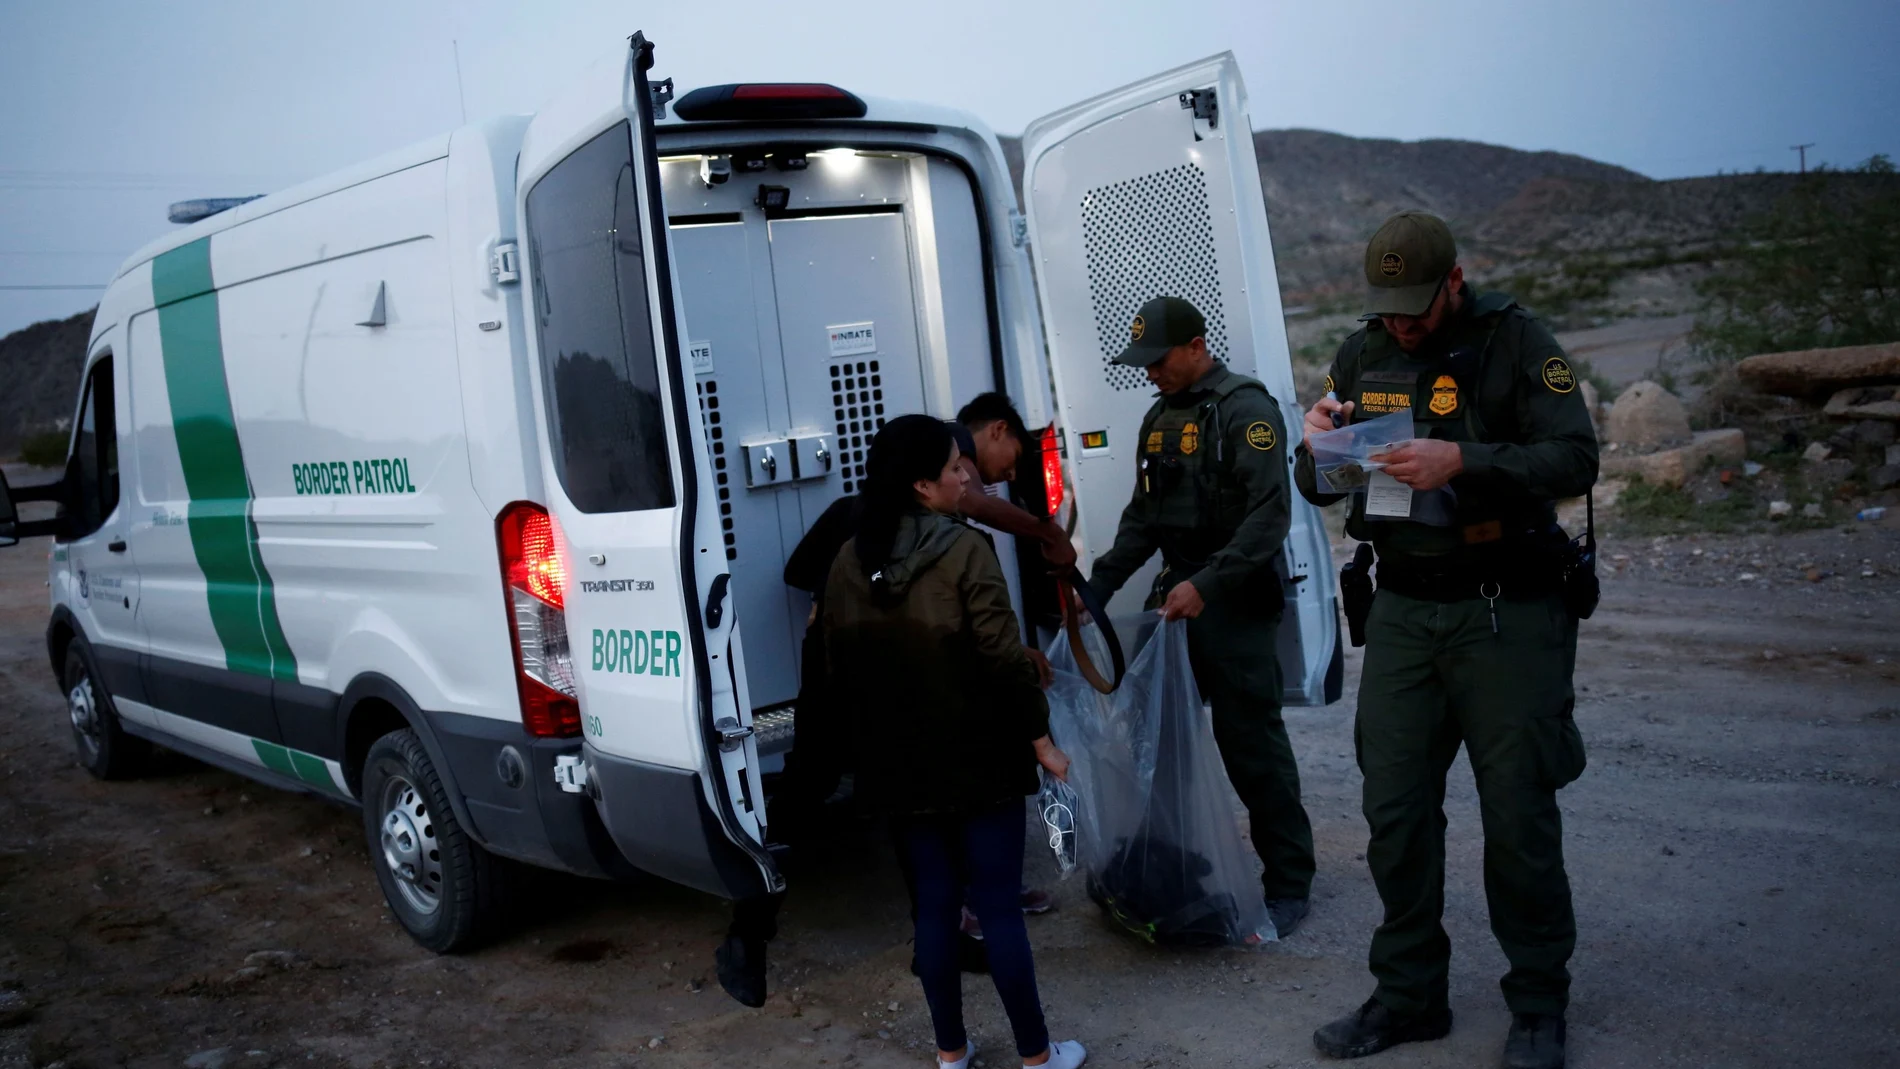 FILE PHOTO: Migrants from Central America who were detained hand over their belongings to U.S. Border Patrol agents after crossing into the United States from Mexico, in Sunland Park, New Mexico, U.S., July 22, 2021. REUTERS/Jose Luis Gonzalez/File Photo